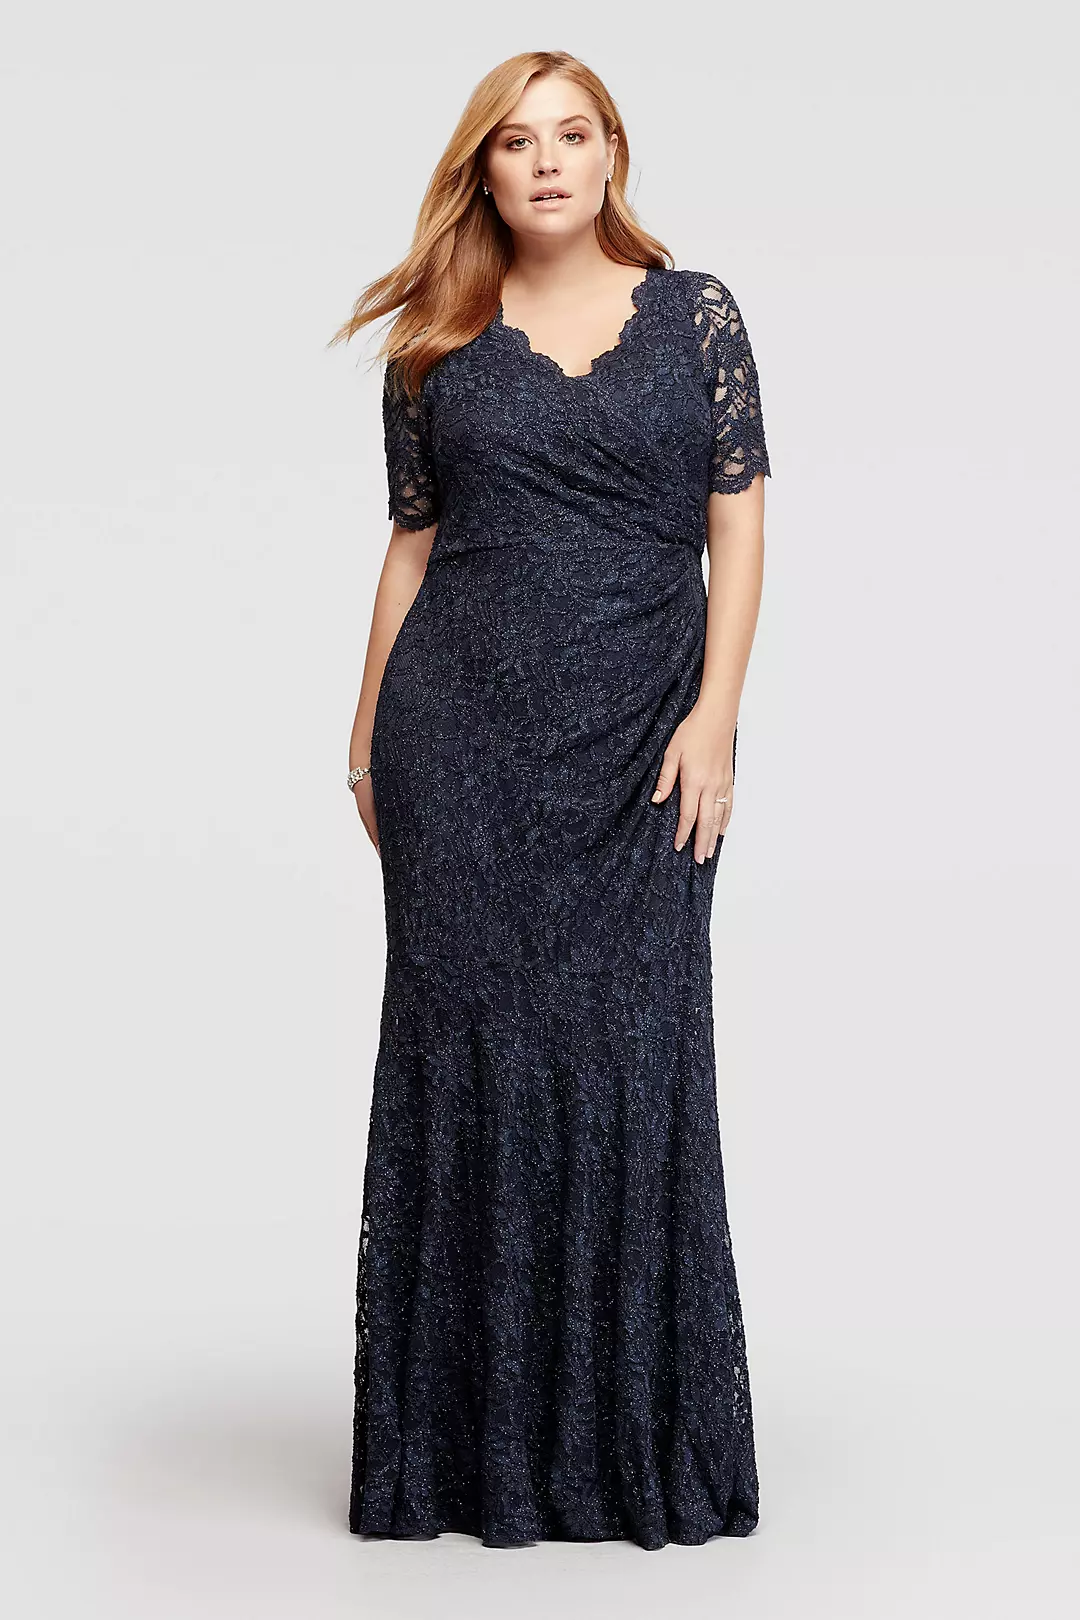 Allover Lace Elbow Sleeved Dress with Scallop Trim Image